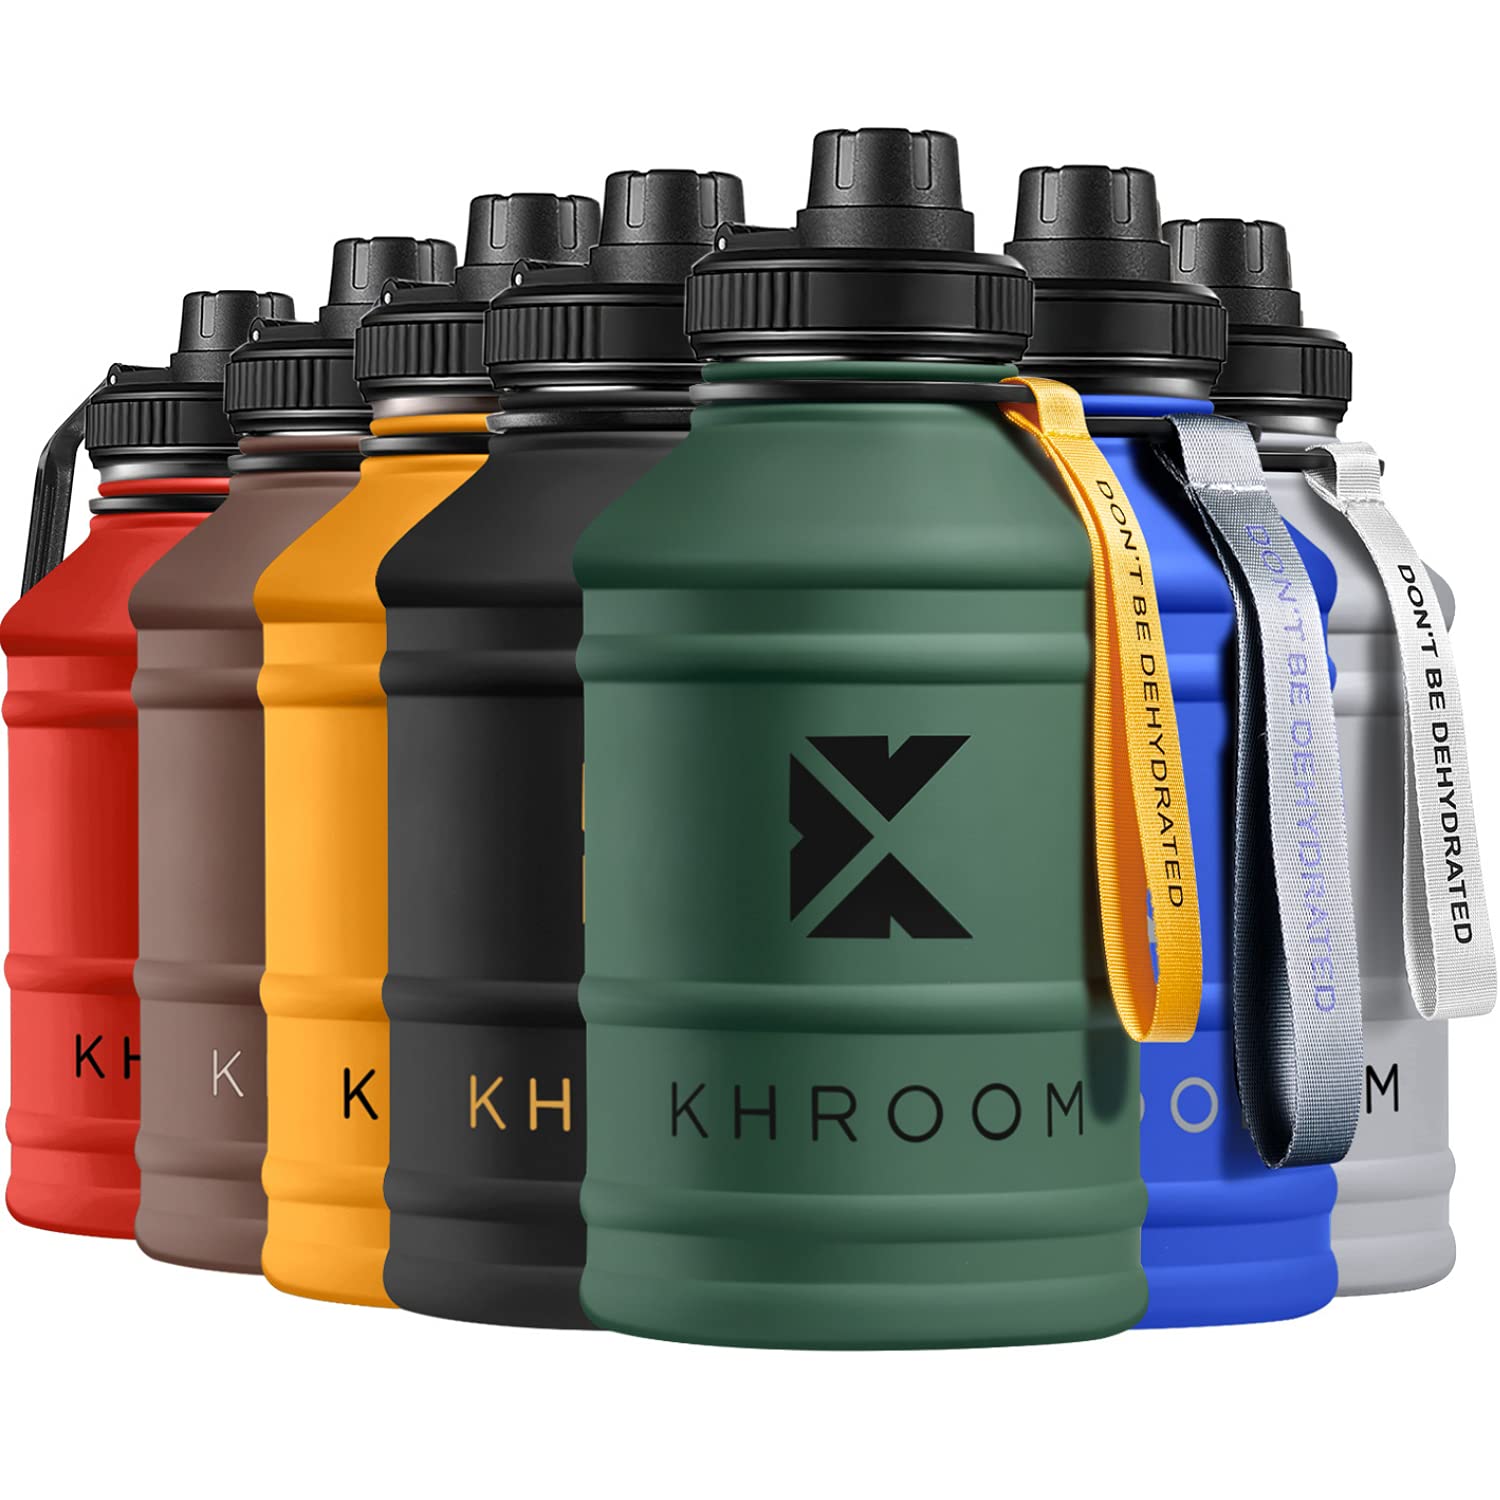 KHROOM 2.2l gym water bottle | stainless steel / metal | BPA free | Water Jug | XXL Half Gallon | 2litre for Fitness, Camping, Bodybuilding (Green)